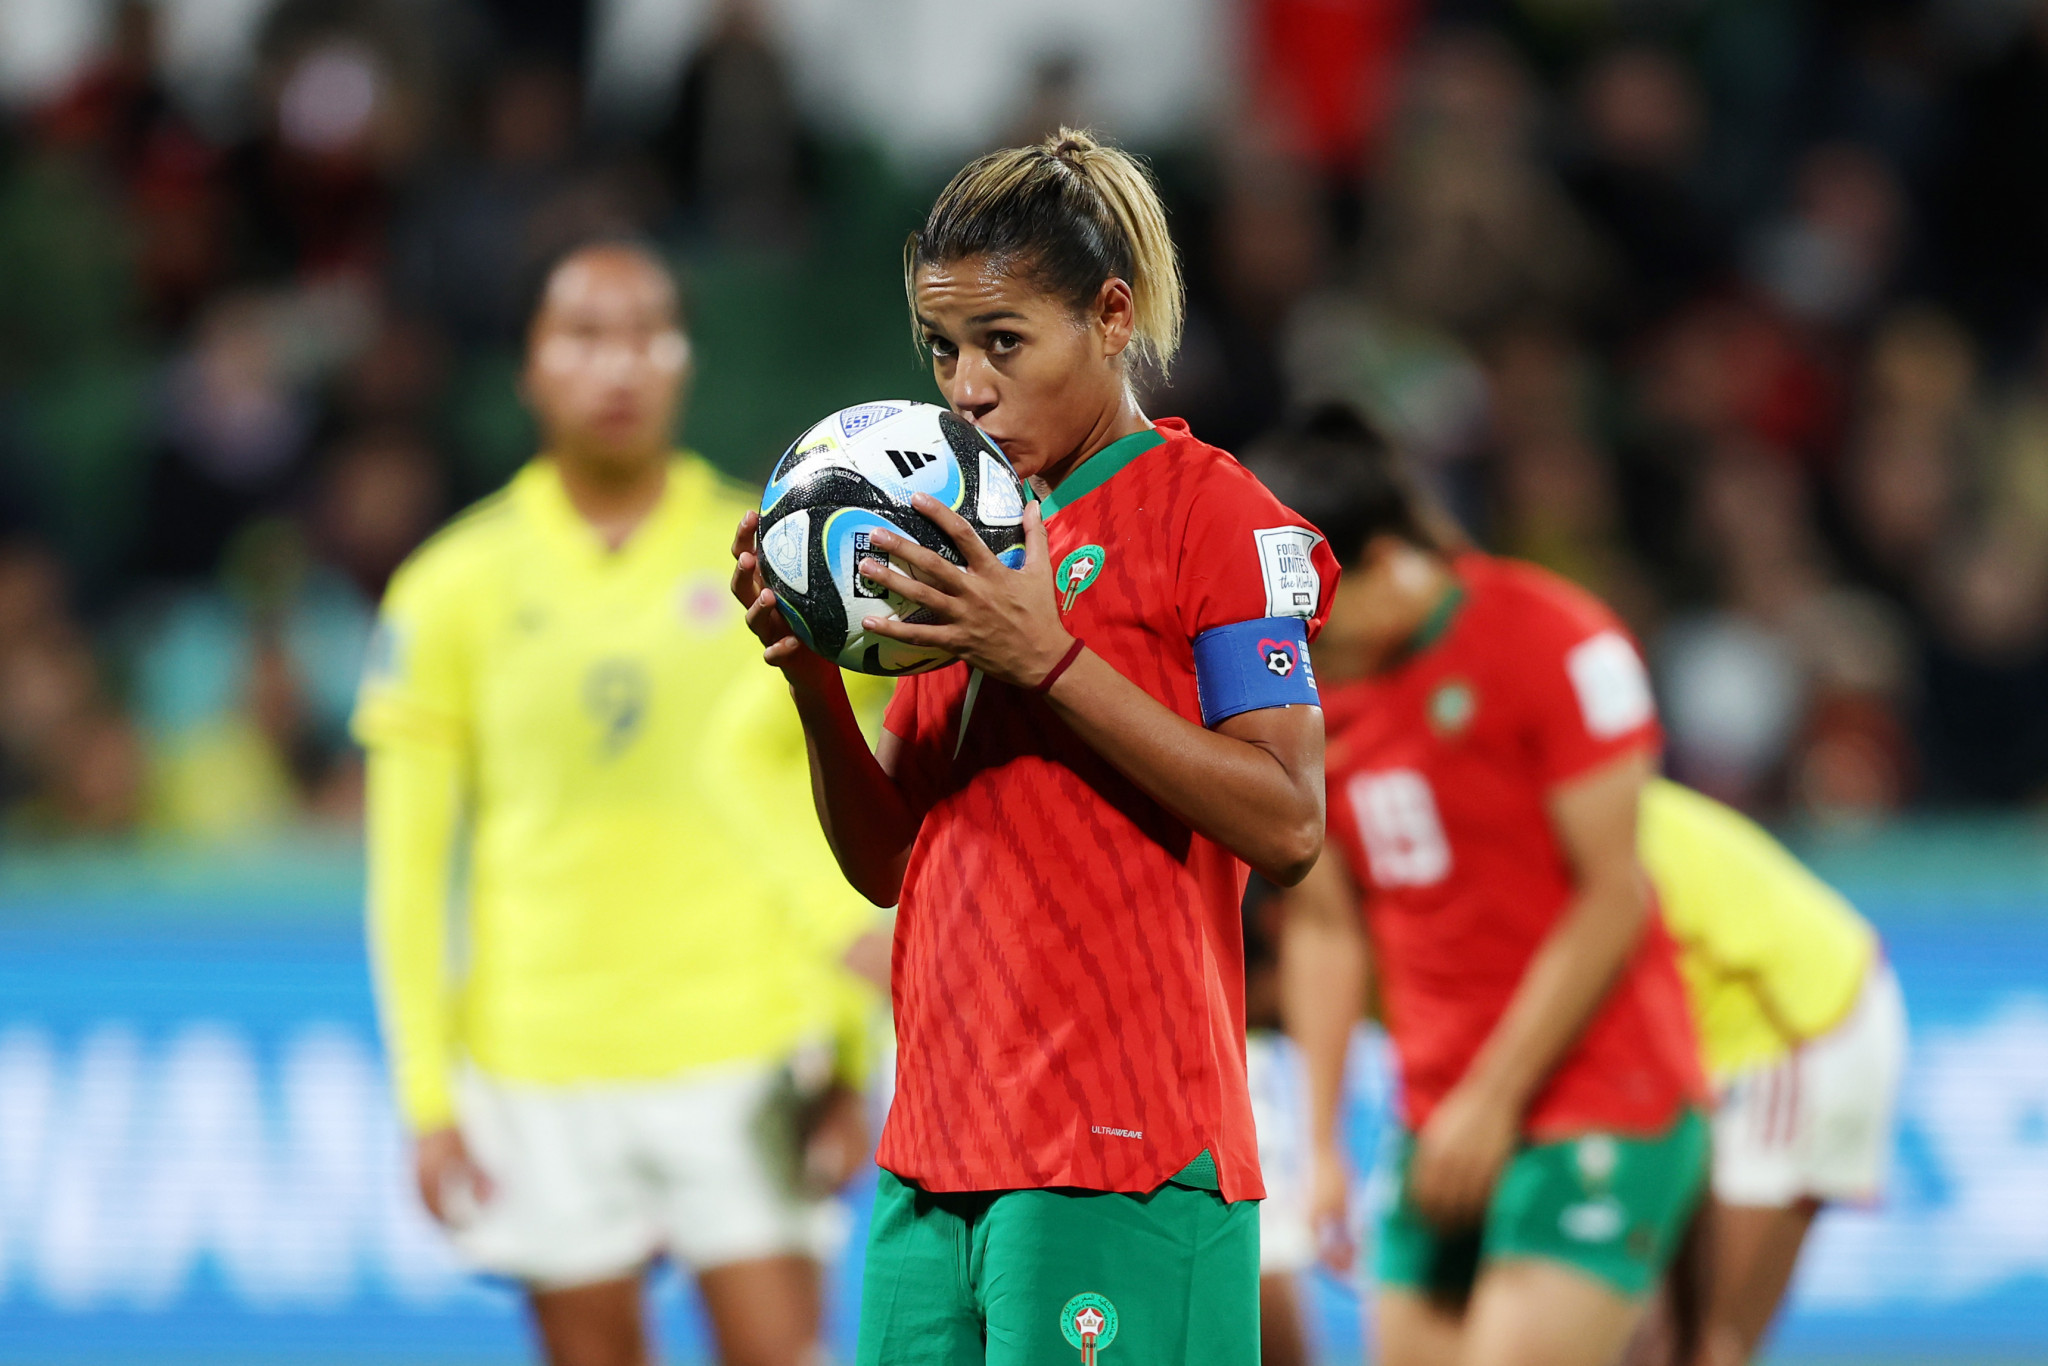 Ghizlane Chebbak missed her spotkick in the first half but Anissa Lahmari made no mistake from the rebound ©Getty Images